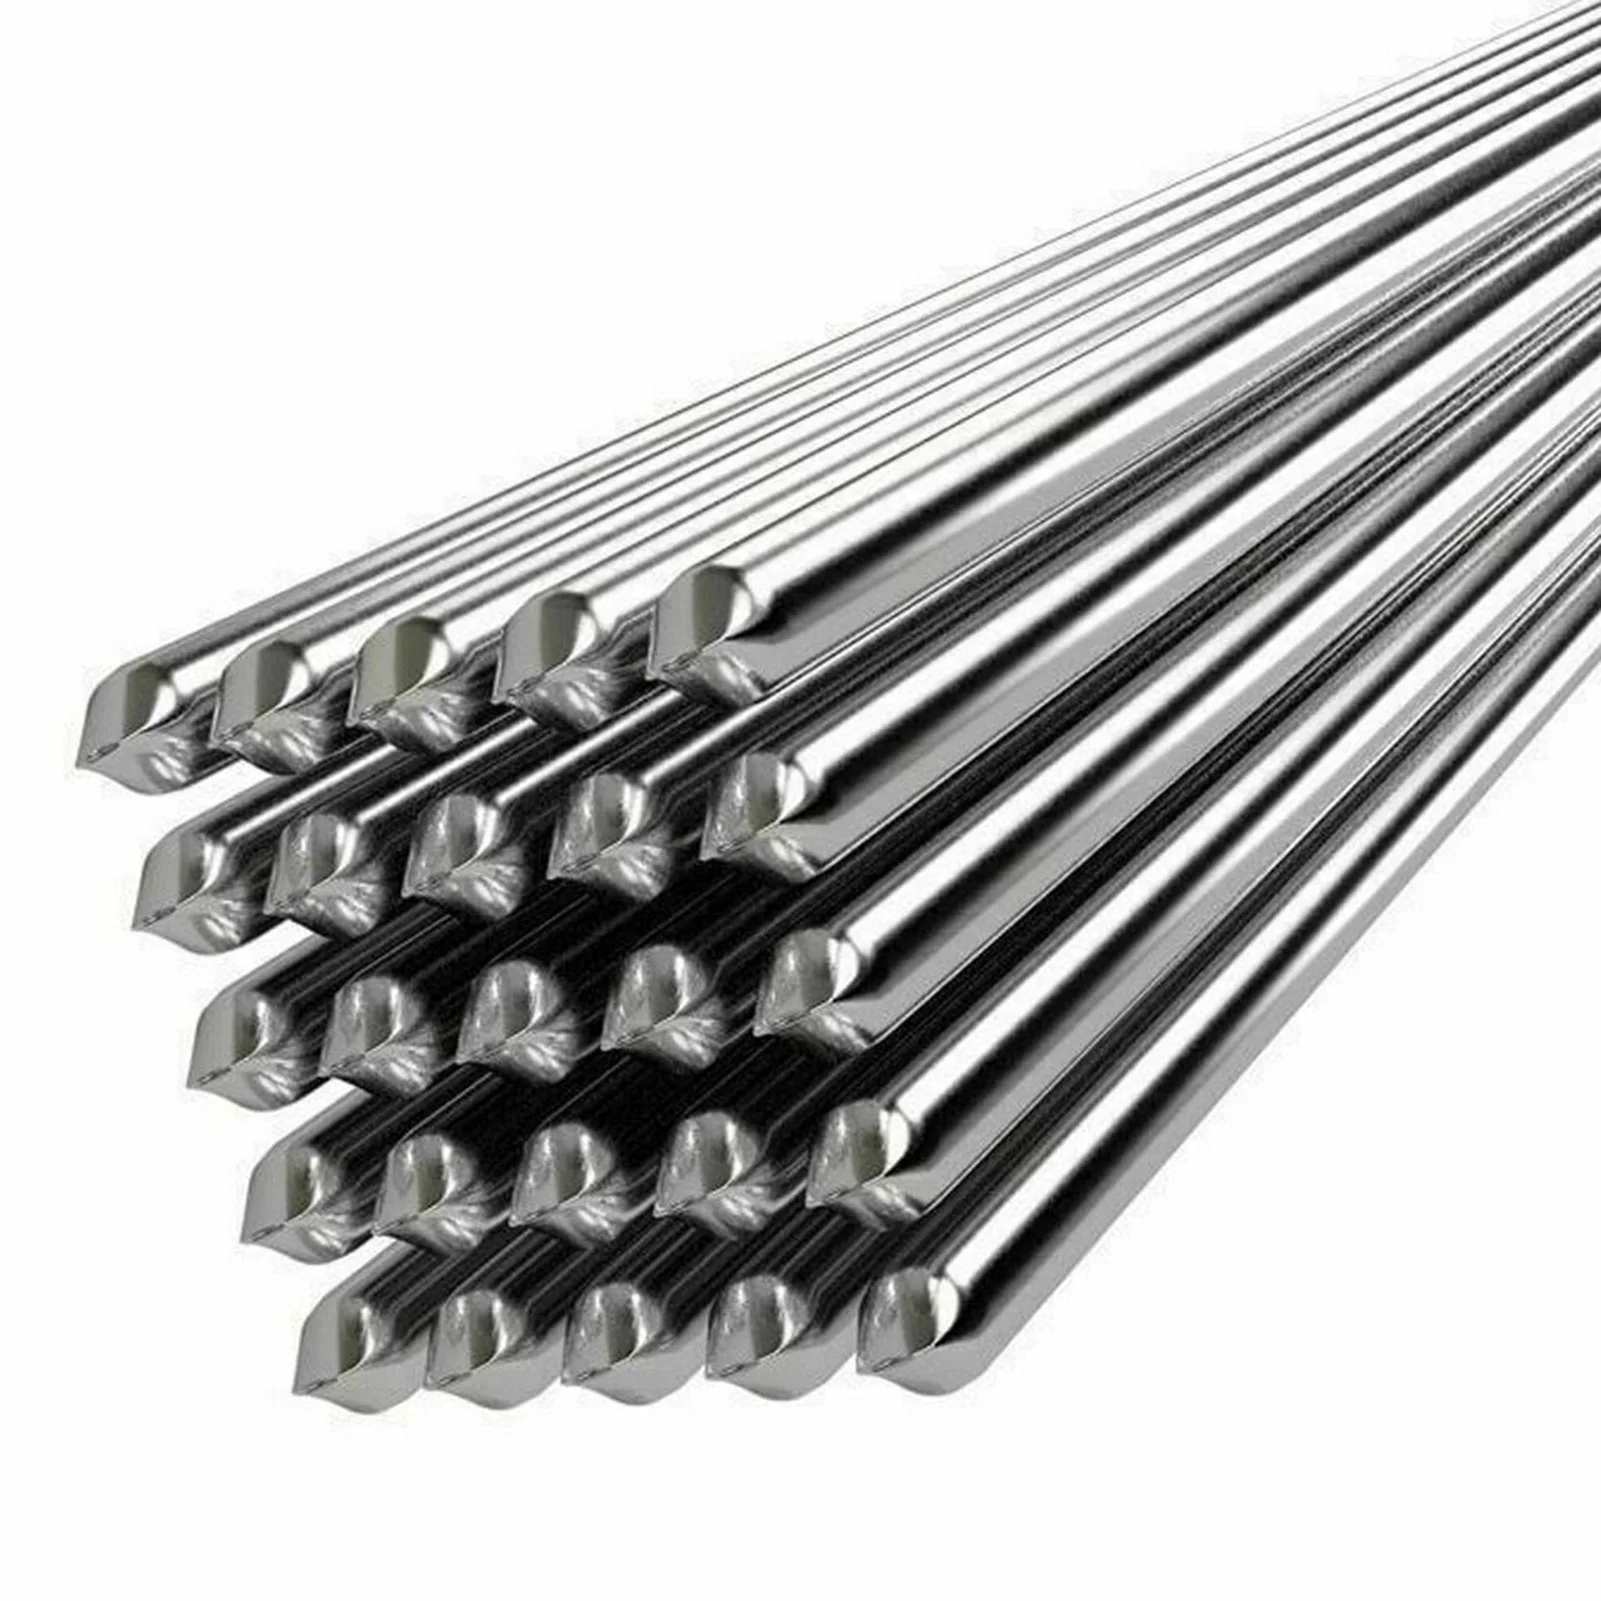 

10Pcs Aluminum Welding Rods Flux-cored No Flux Required Low Melting Point Corrosion Resistance